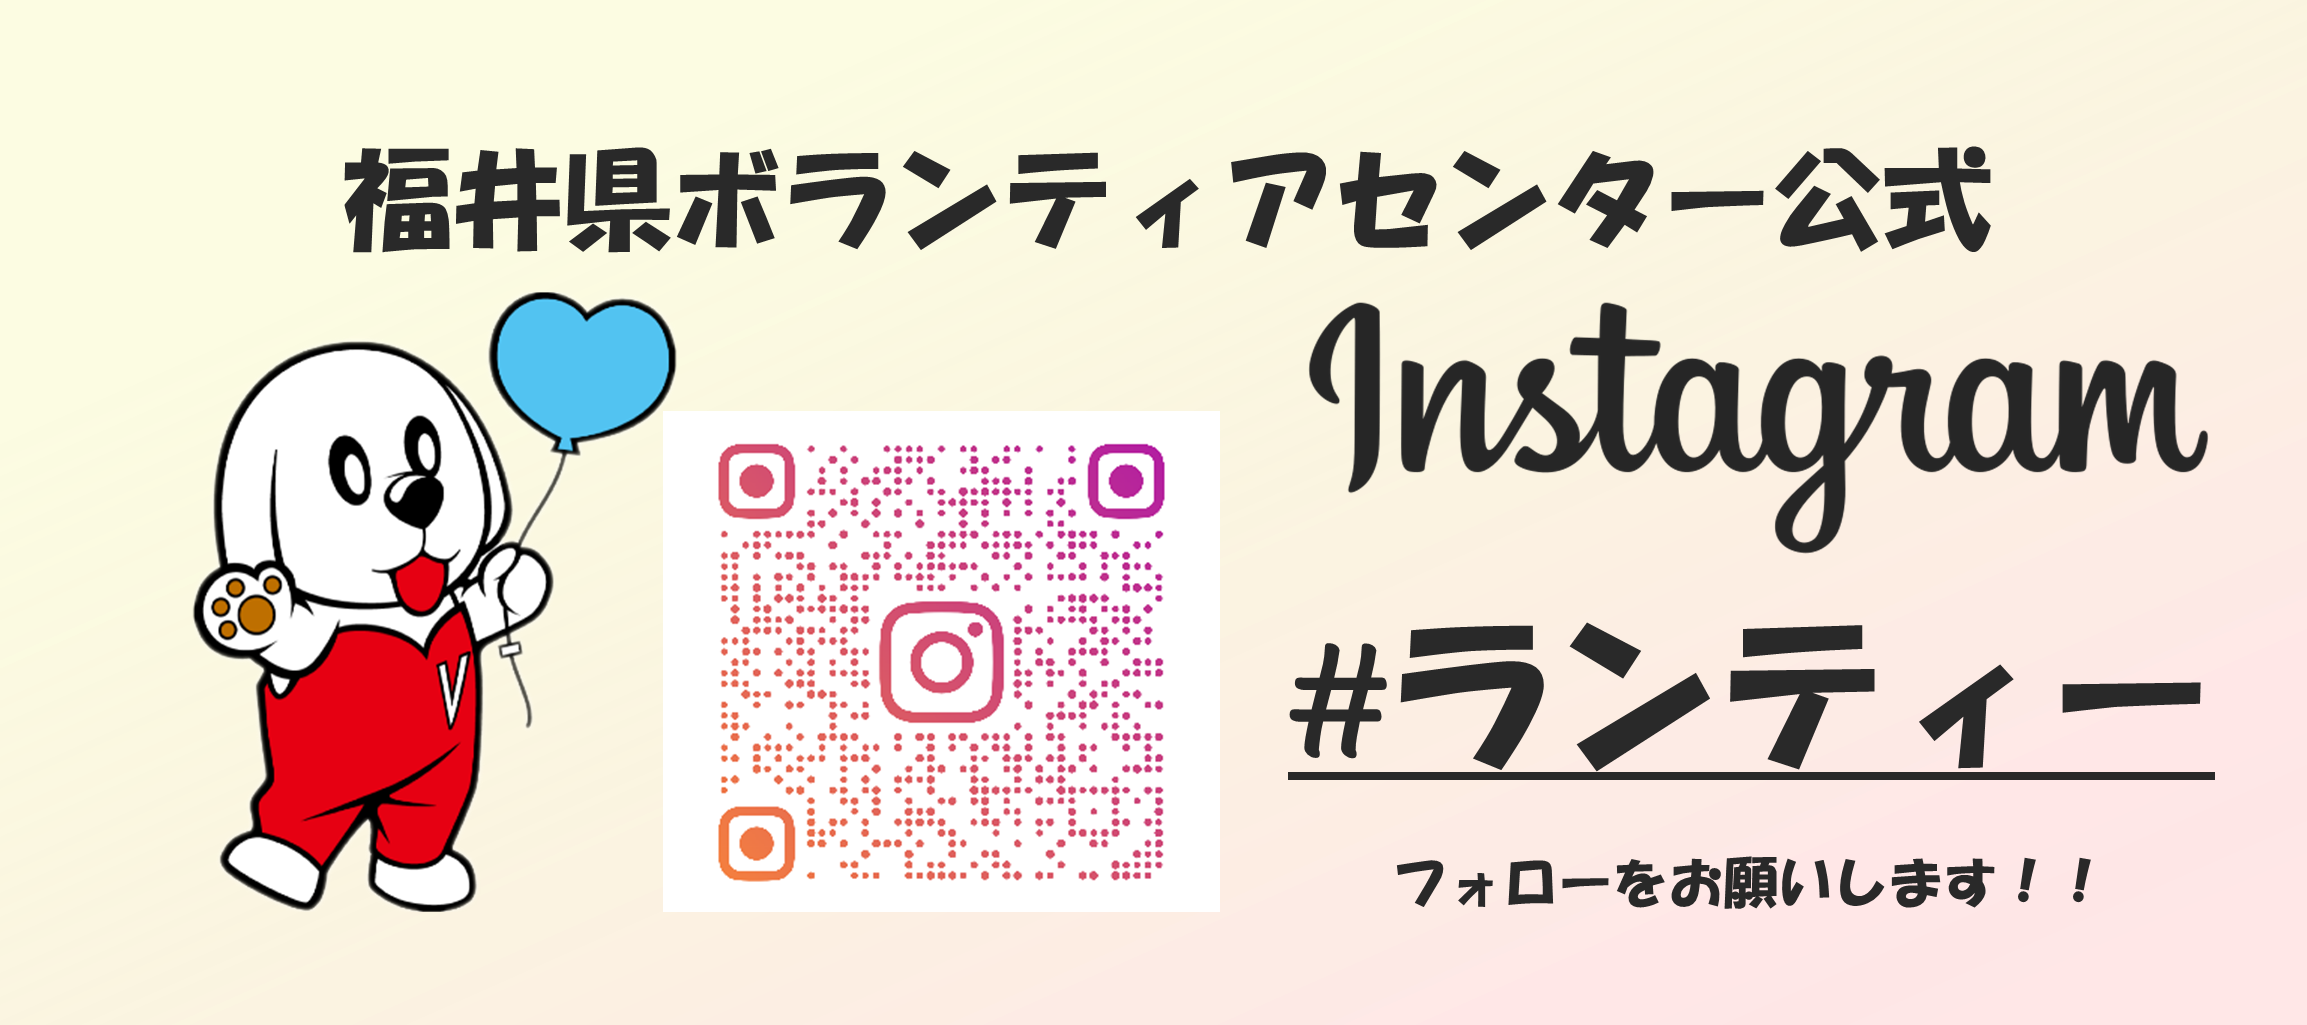 HP用インスタ.png